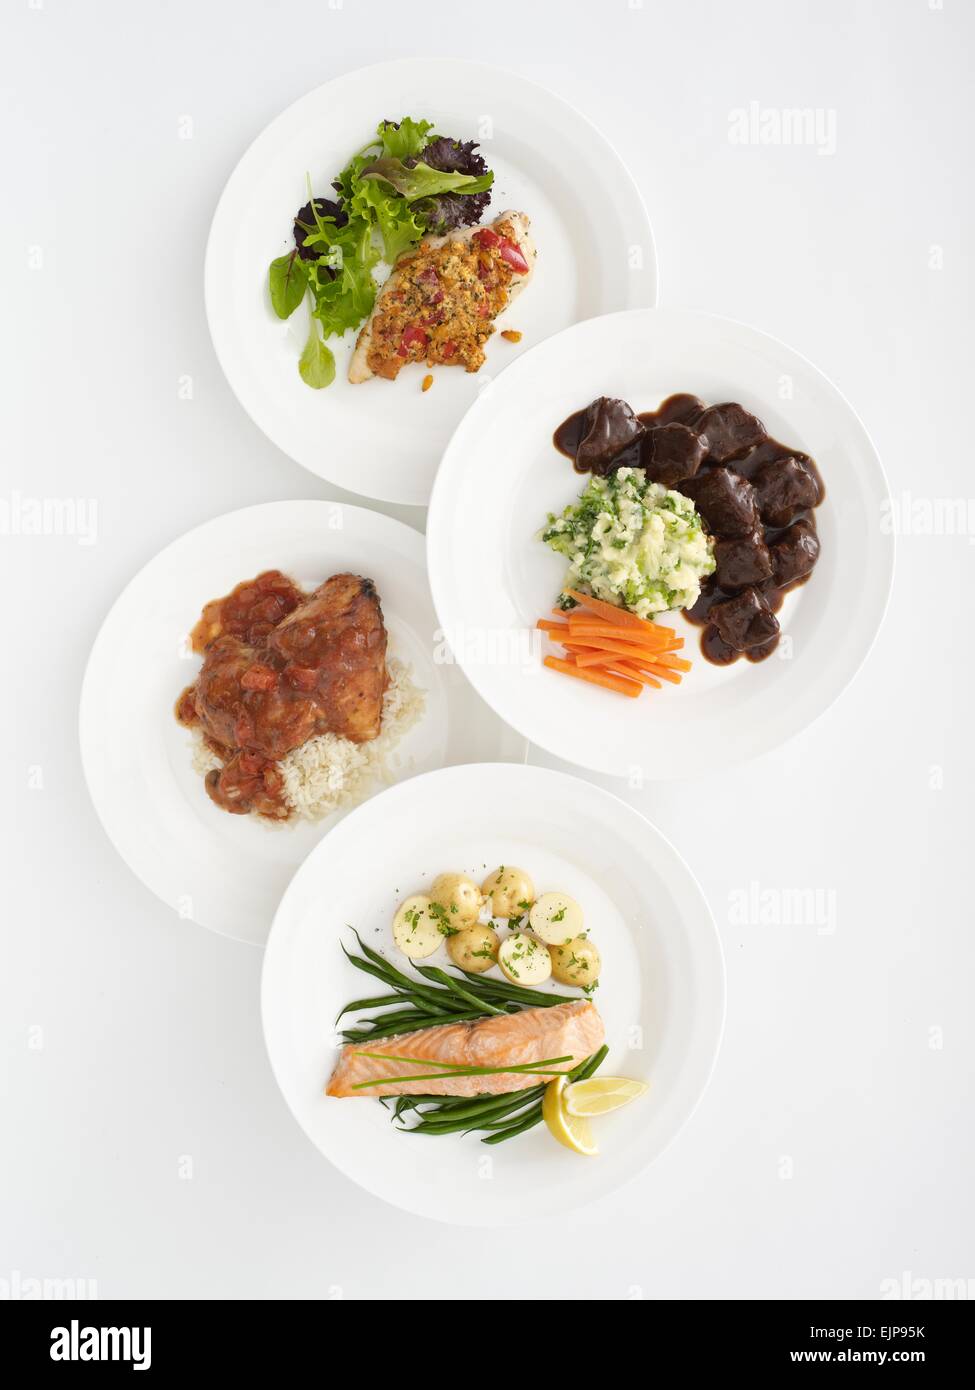 Aerial photograph of four plated meals Chicken provencal grilled salmon beef in gravy and chicken in red wine and mushroom sauce Stock Photo